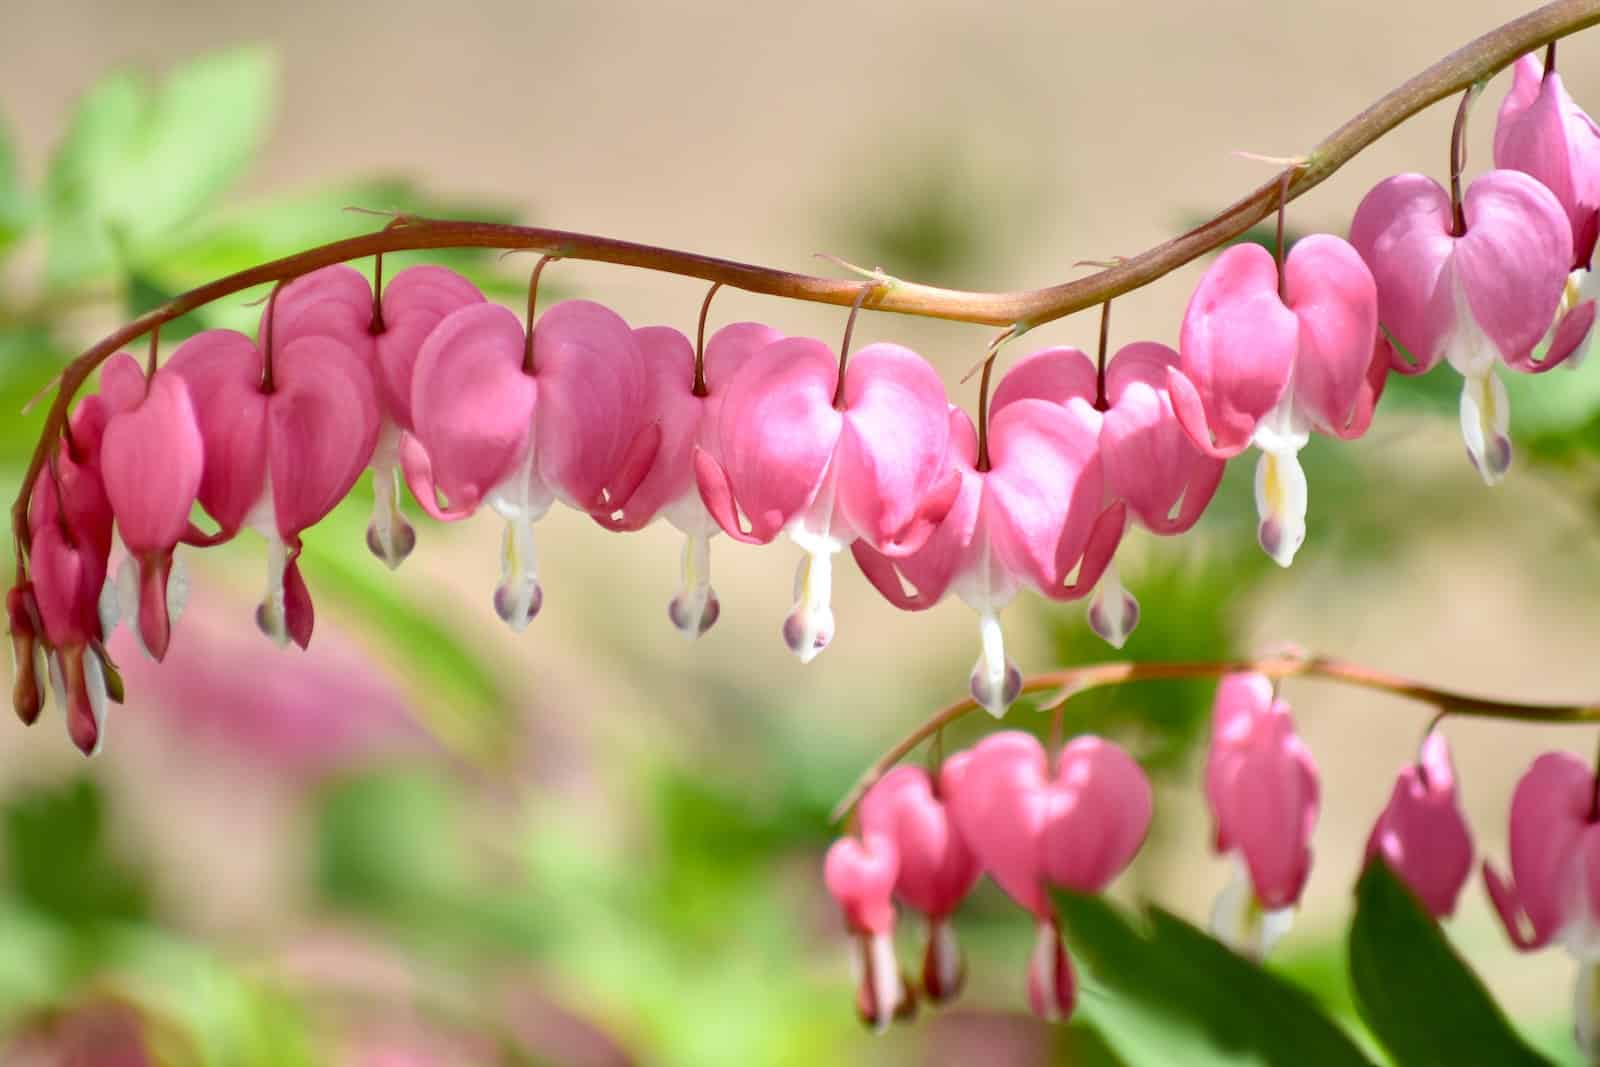 v8zq1l39lwk Bleeding Heart Flower: Meaning, Symbolism, Properties, and Uses 1